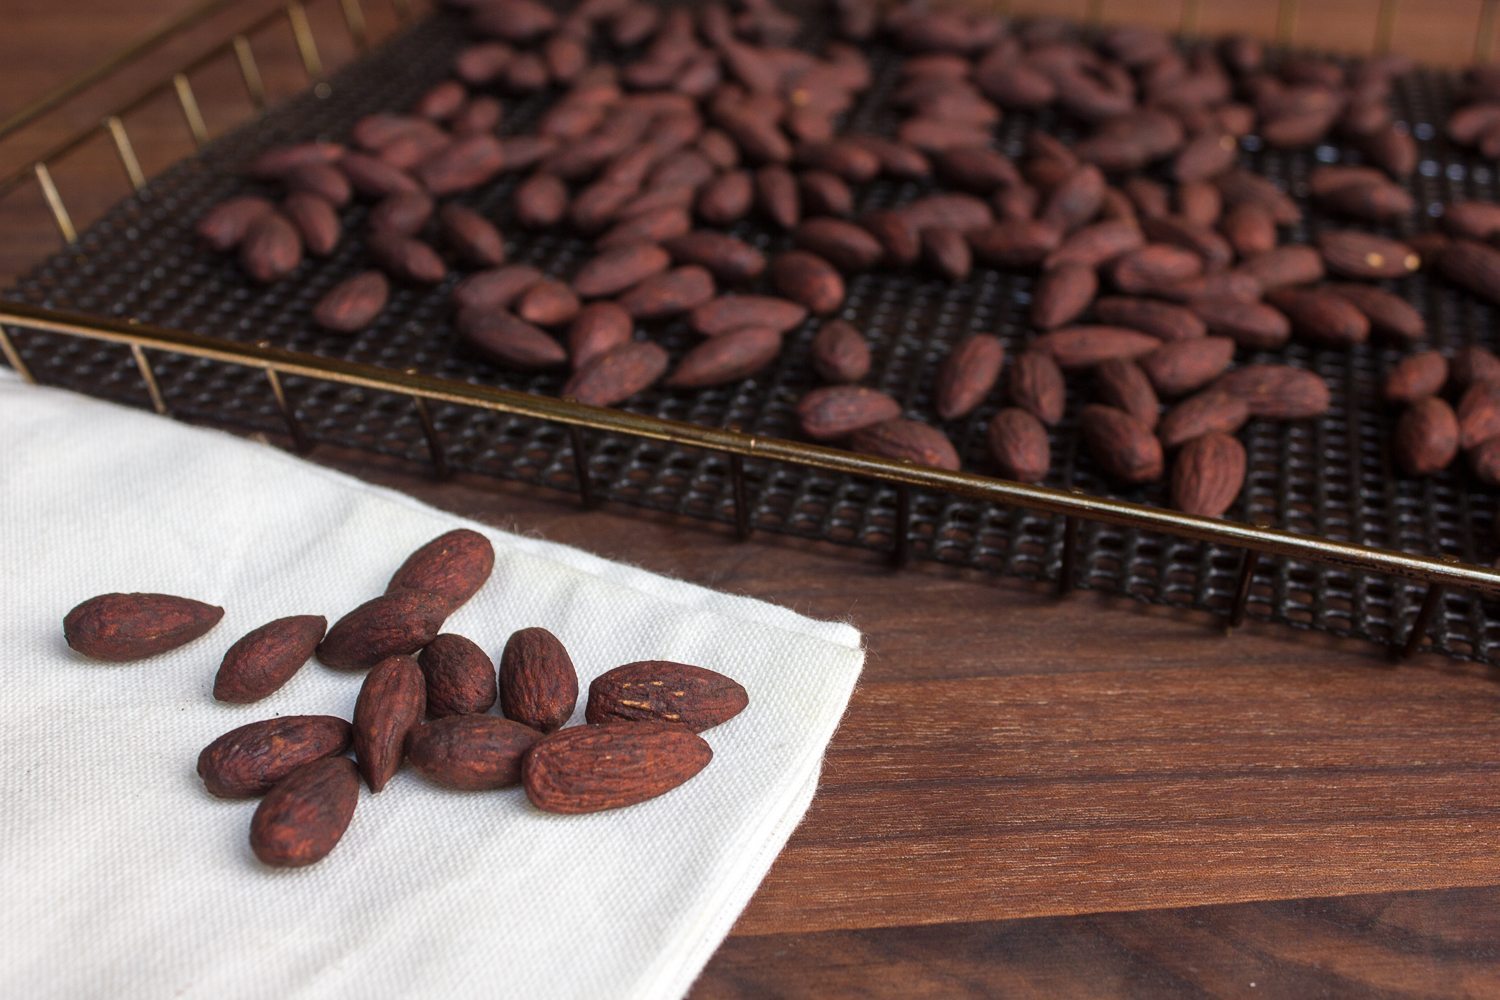 Smoked almonds on a tray